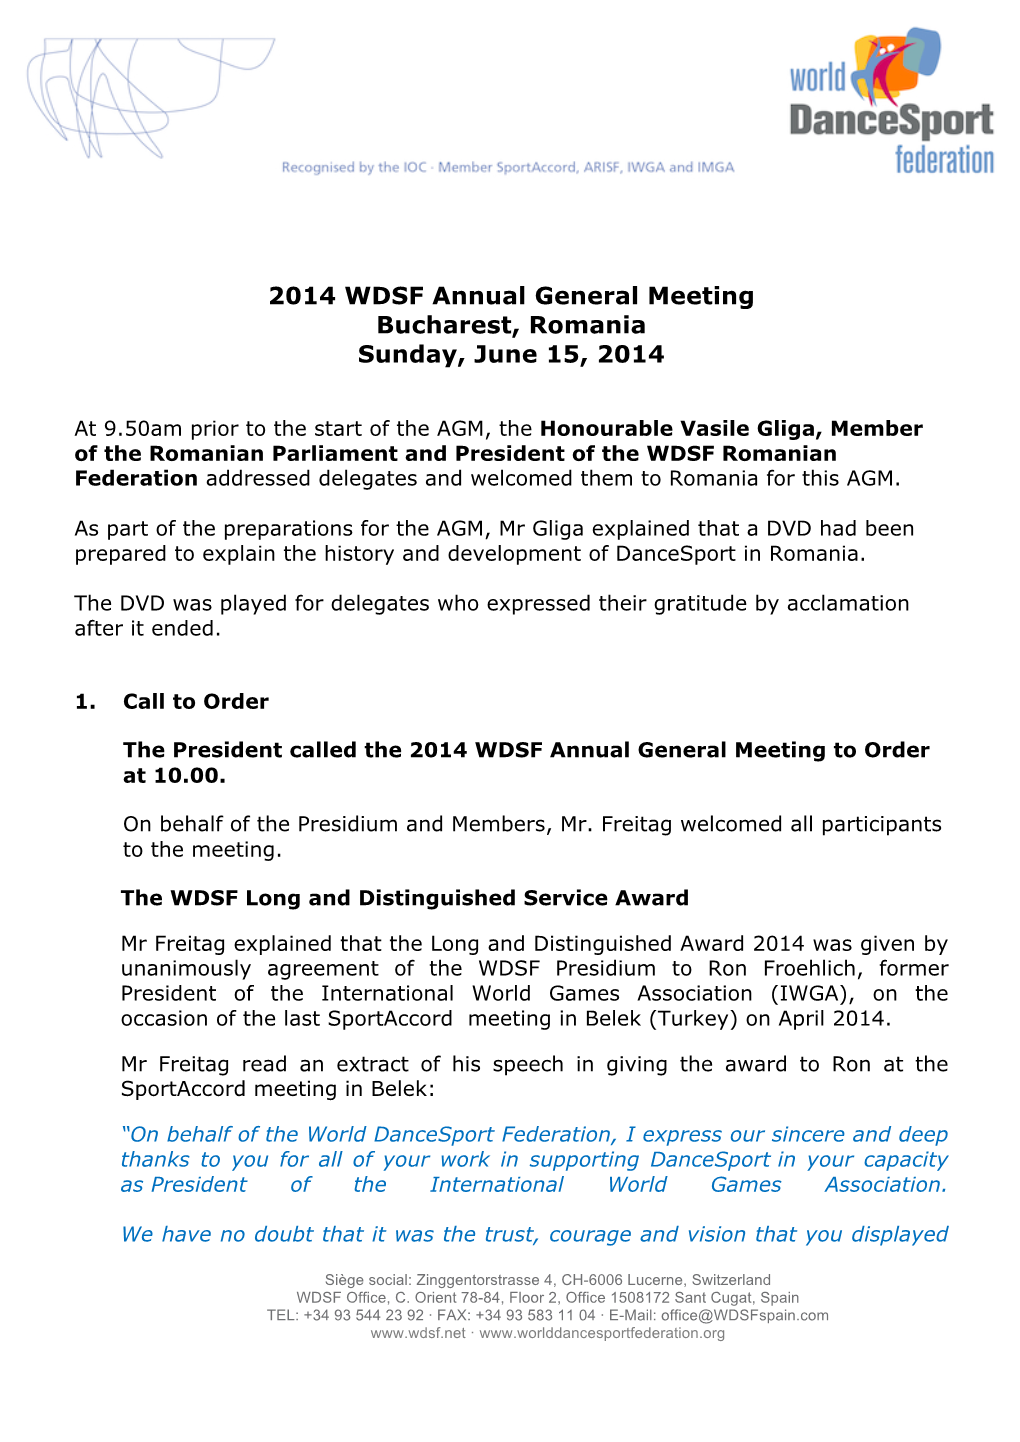 2014 WDSF Annual General Meeting Minutes